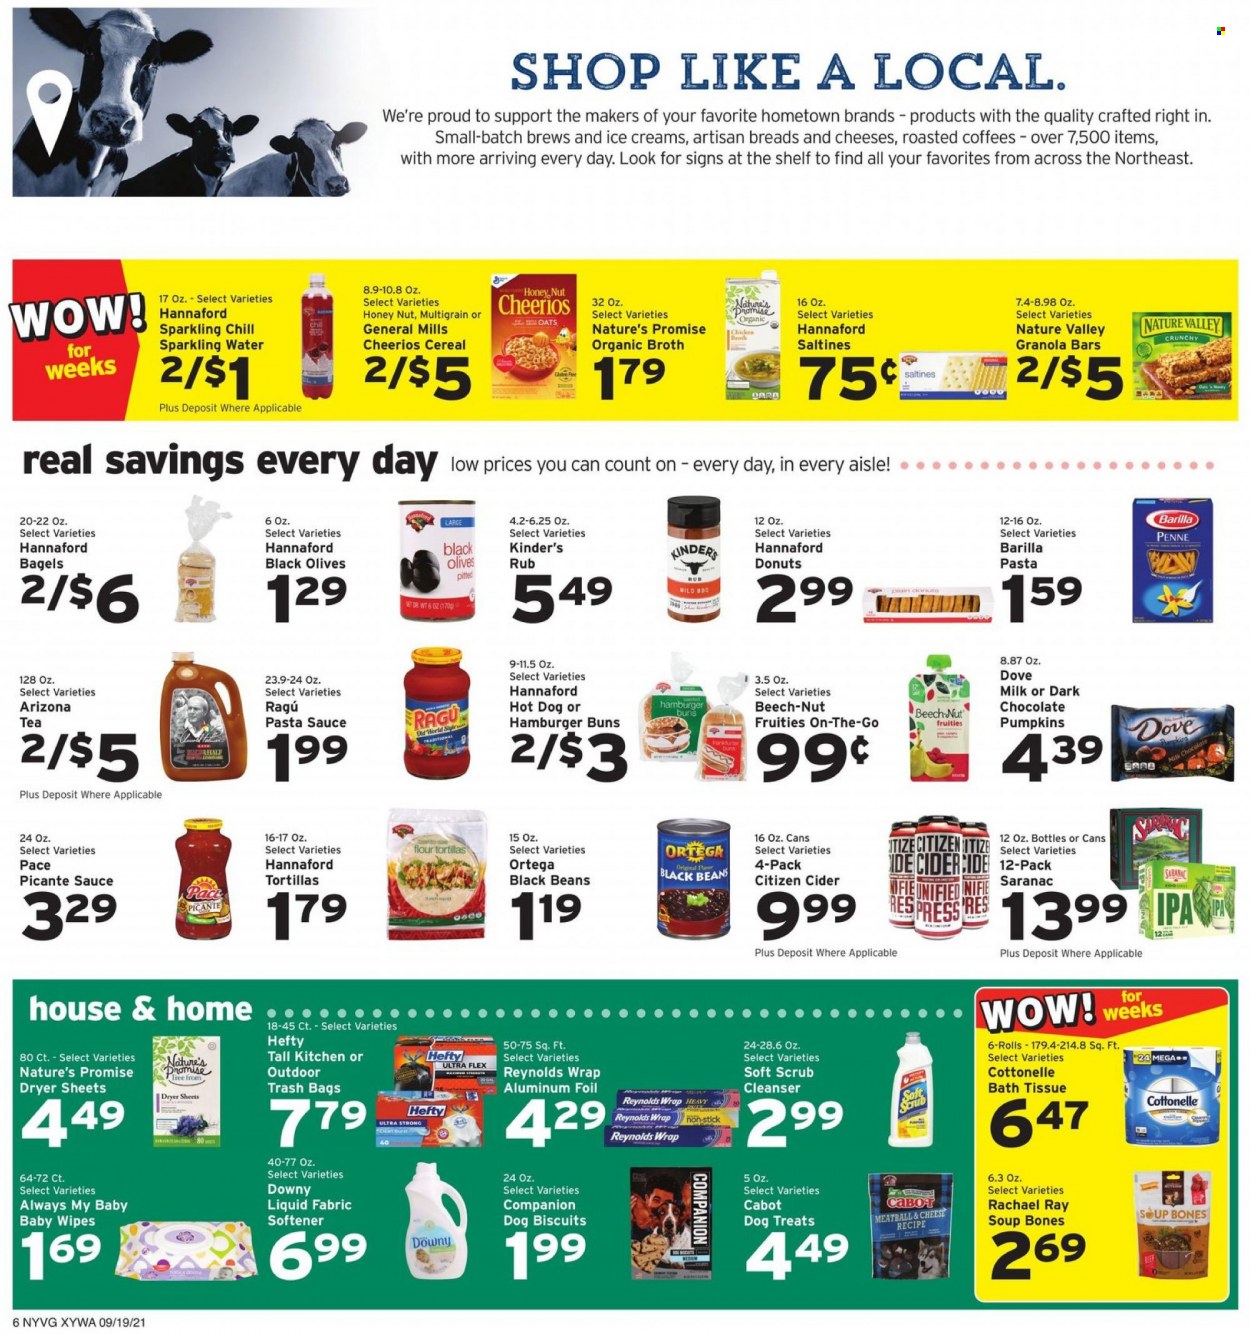 thumbnail - Hannaford Flyer - 09/19/2021 - 09/25/2021 - Sales products - bagels, tortillas, buns, burger buns, Nature’s Promise, flour tortillas, donut, beans, hot dog, pasta sauce, soup, sauce, Barilla, ragú pasta, cheese, milk chocolate, chocolate, saltines, oats, broth, black beans, olives, cereals, Cheerios, granola bar, Nature Valley, penne, ragu, AriZona, sparkling water, tea, cider, wipes, baby wipes, Dove, bath tissue, Cottonelle, fabric softener, dryer sheets, Downy Laundry, cleanser, Hefty, trash bags, aluminium foil, animal treats, dog food, dog biscuits. Page 6.